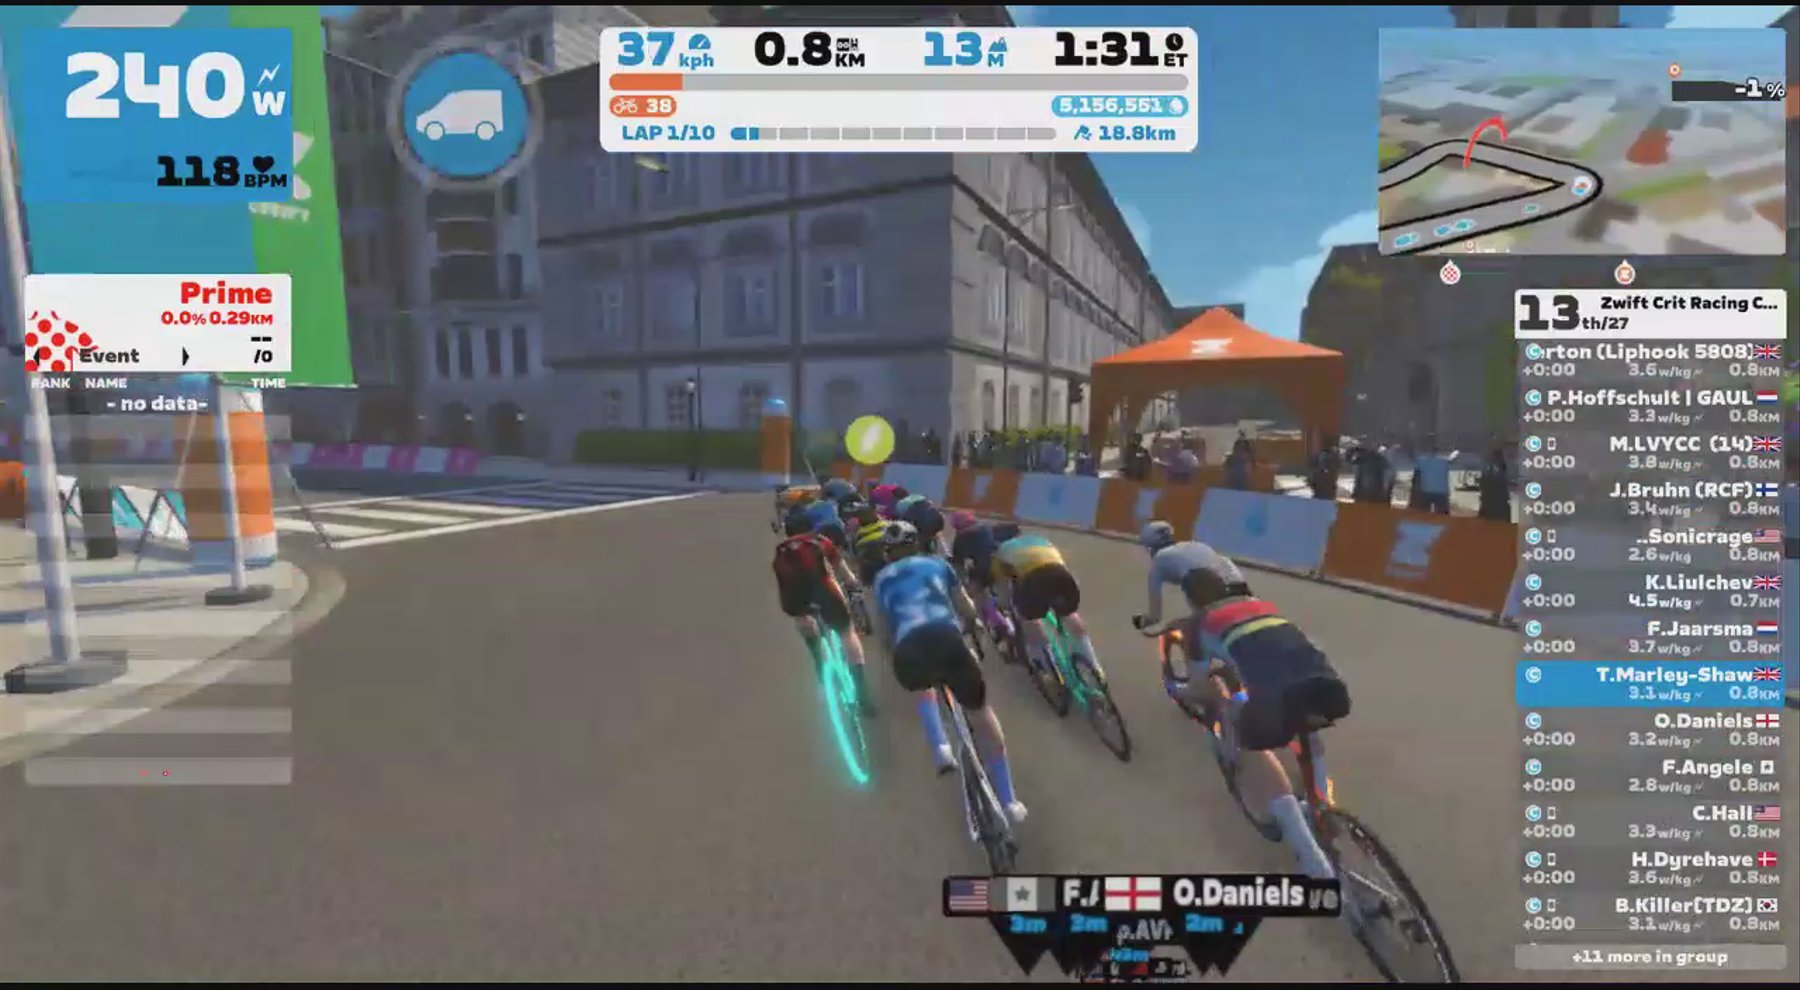 Zwift - Race: Zwift Crit Racing Club - The Bell Lap (C) on The Bell Lap in Crit City